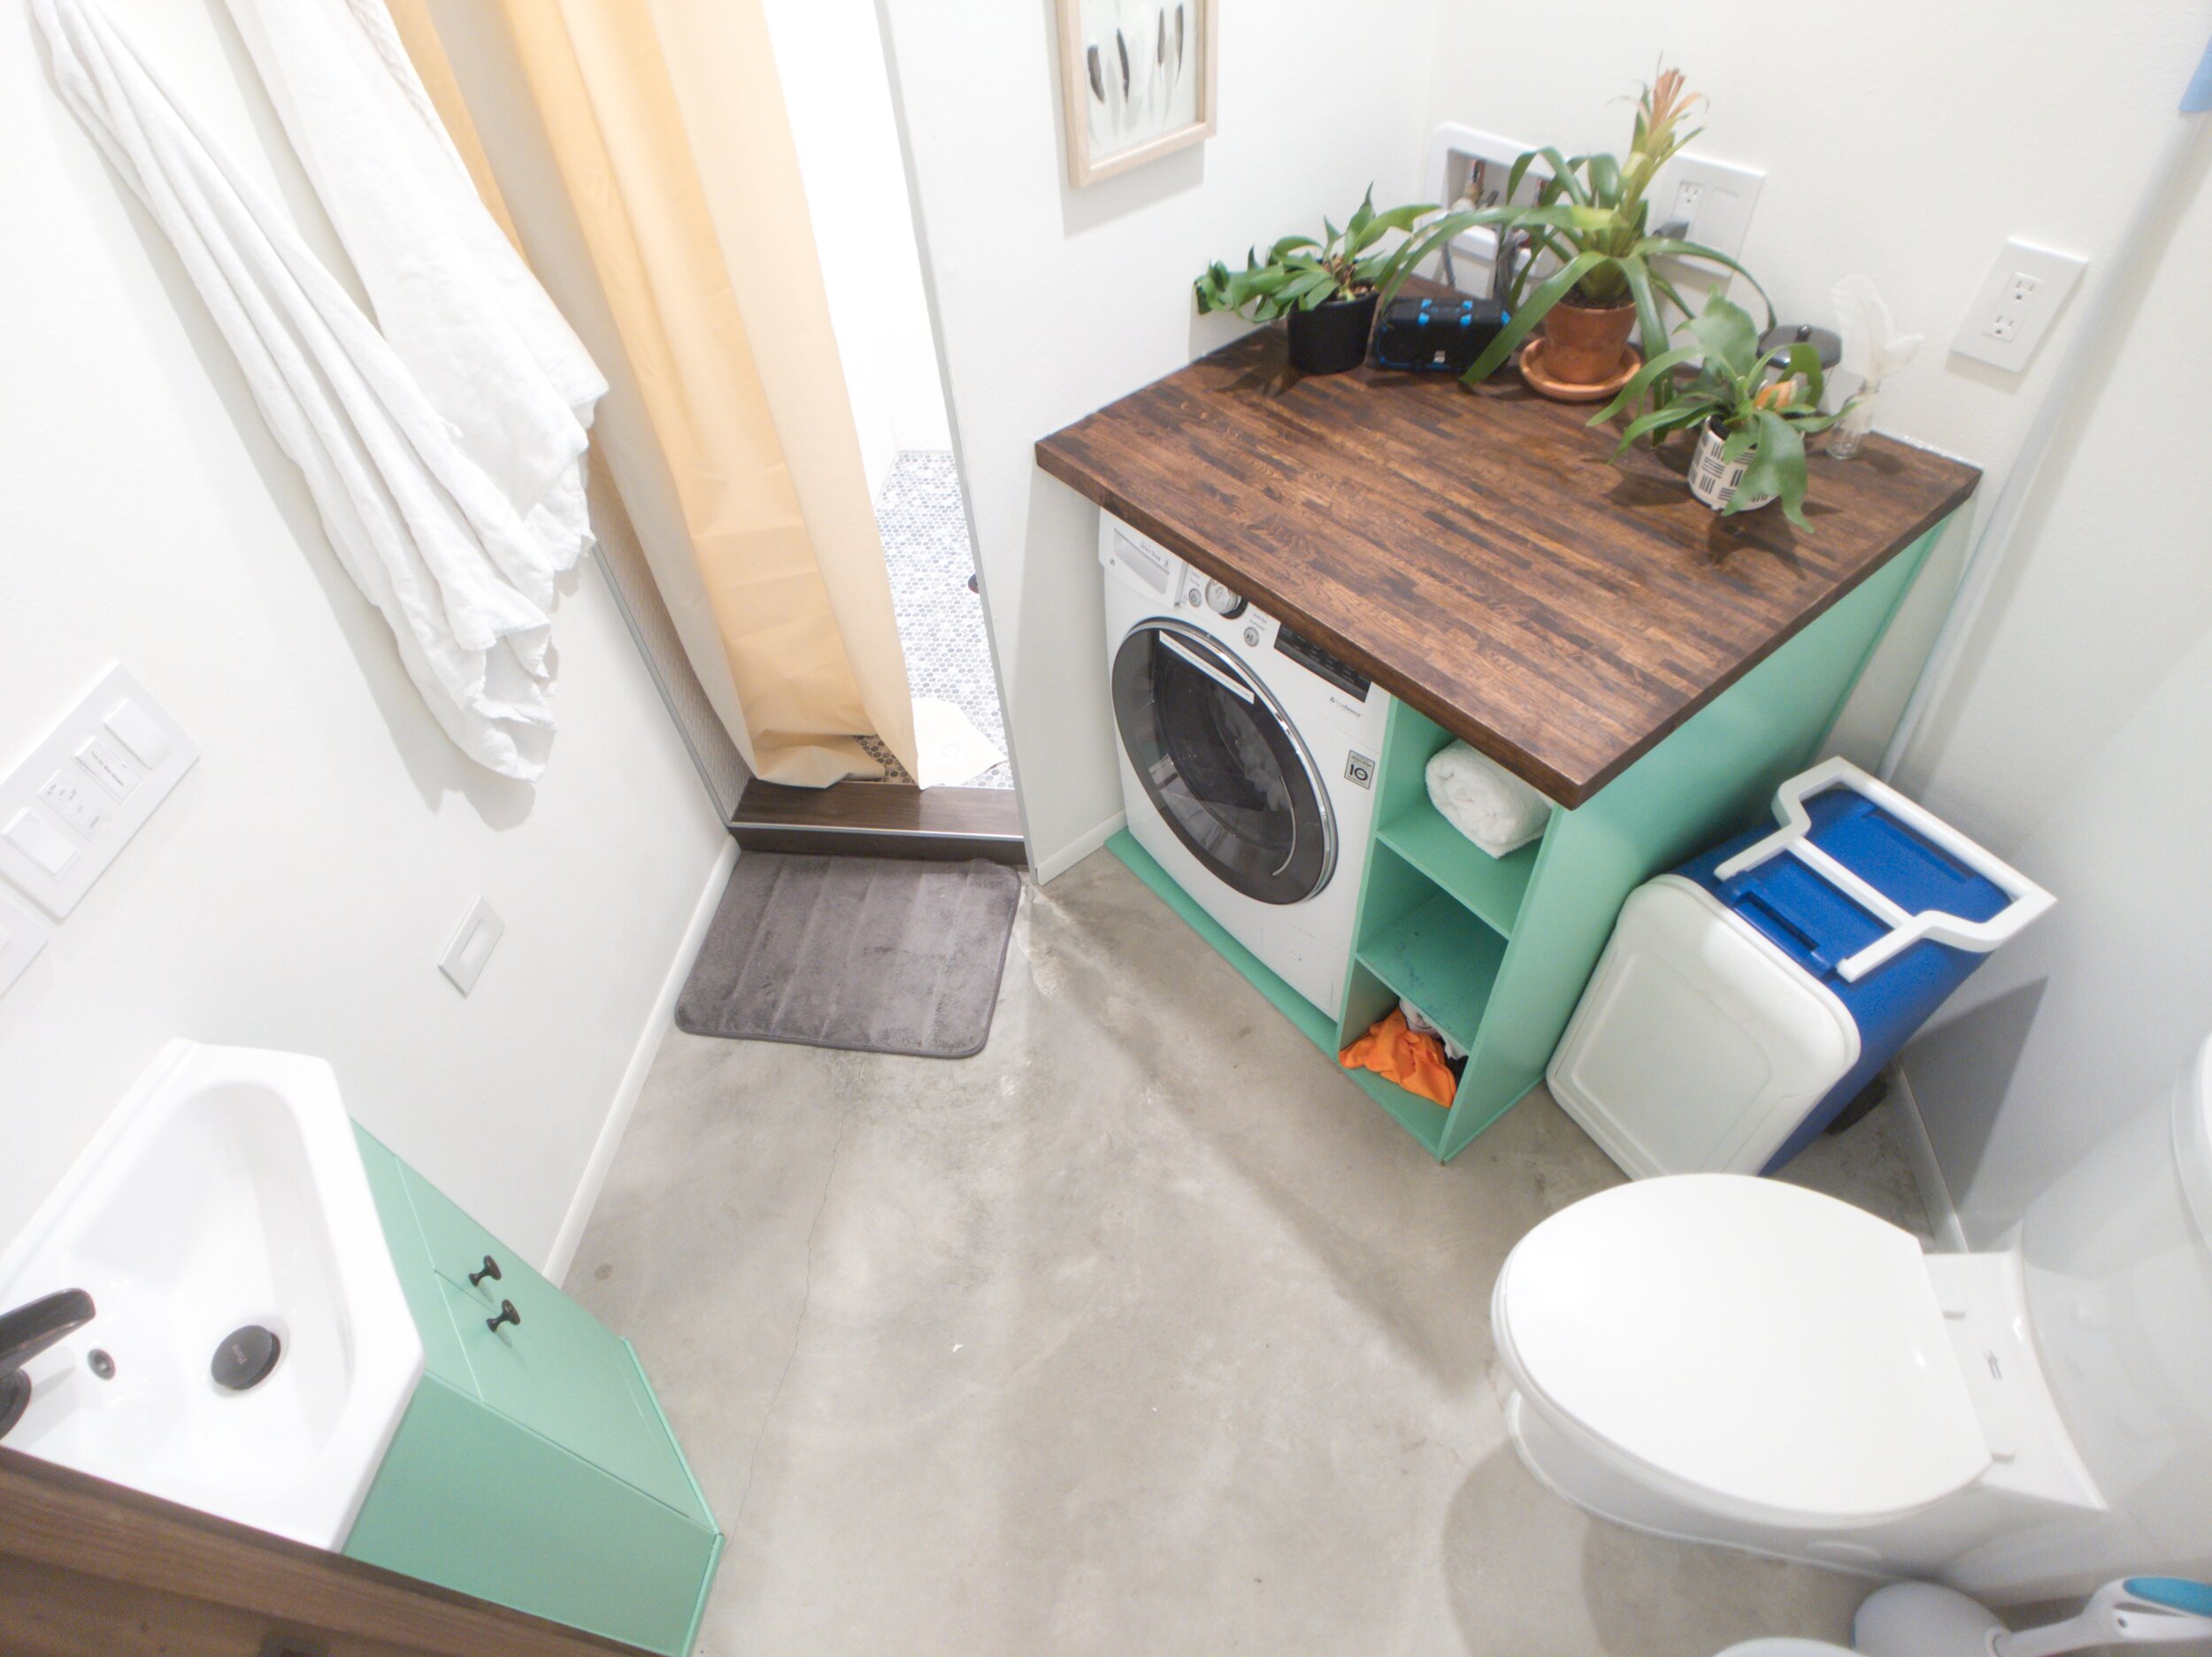 Do Tiny Homes Have Bathrooms?